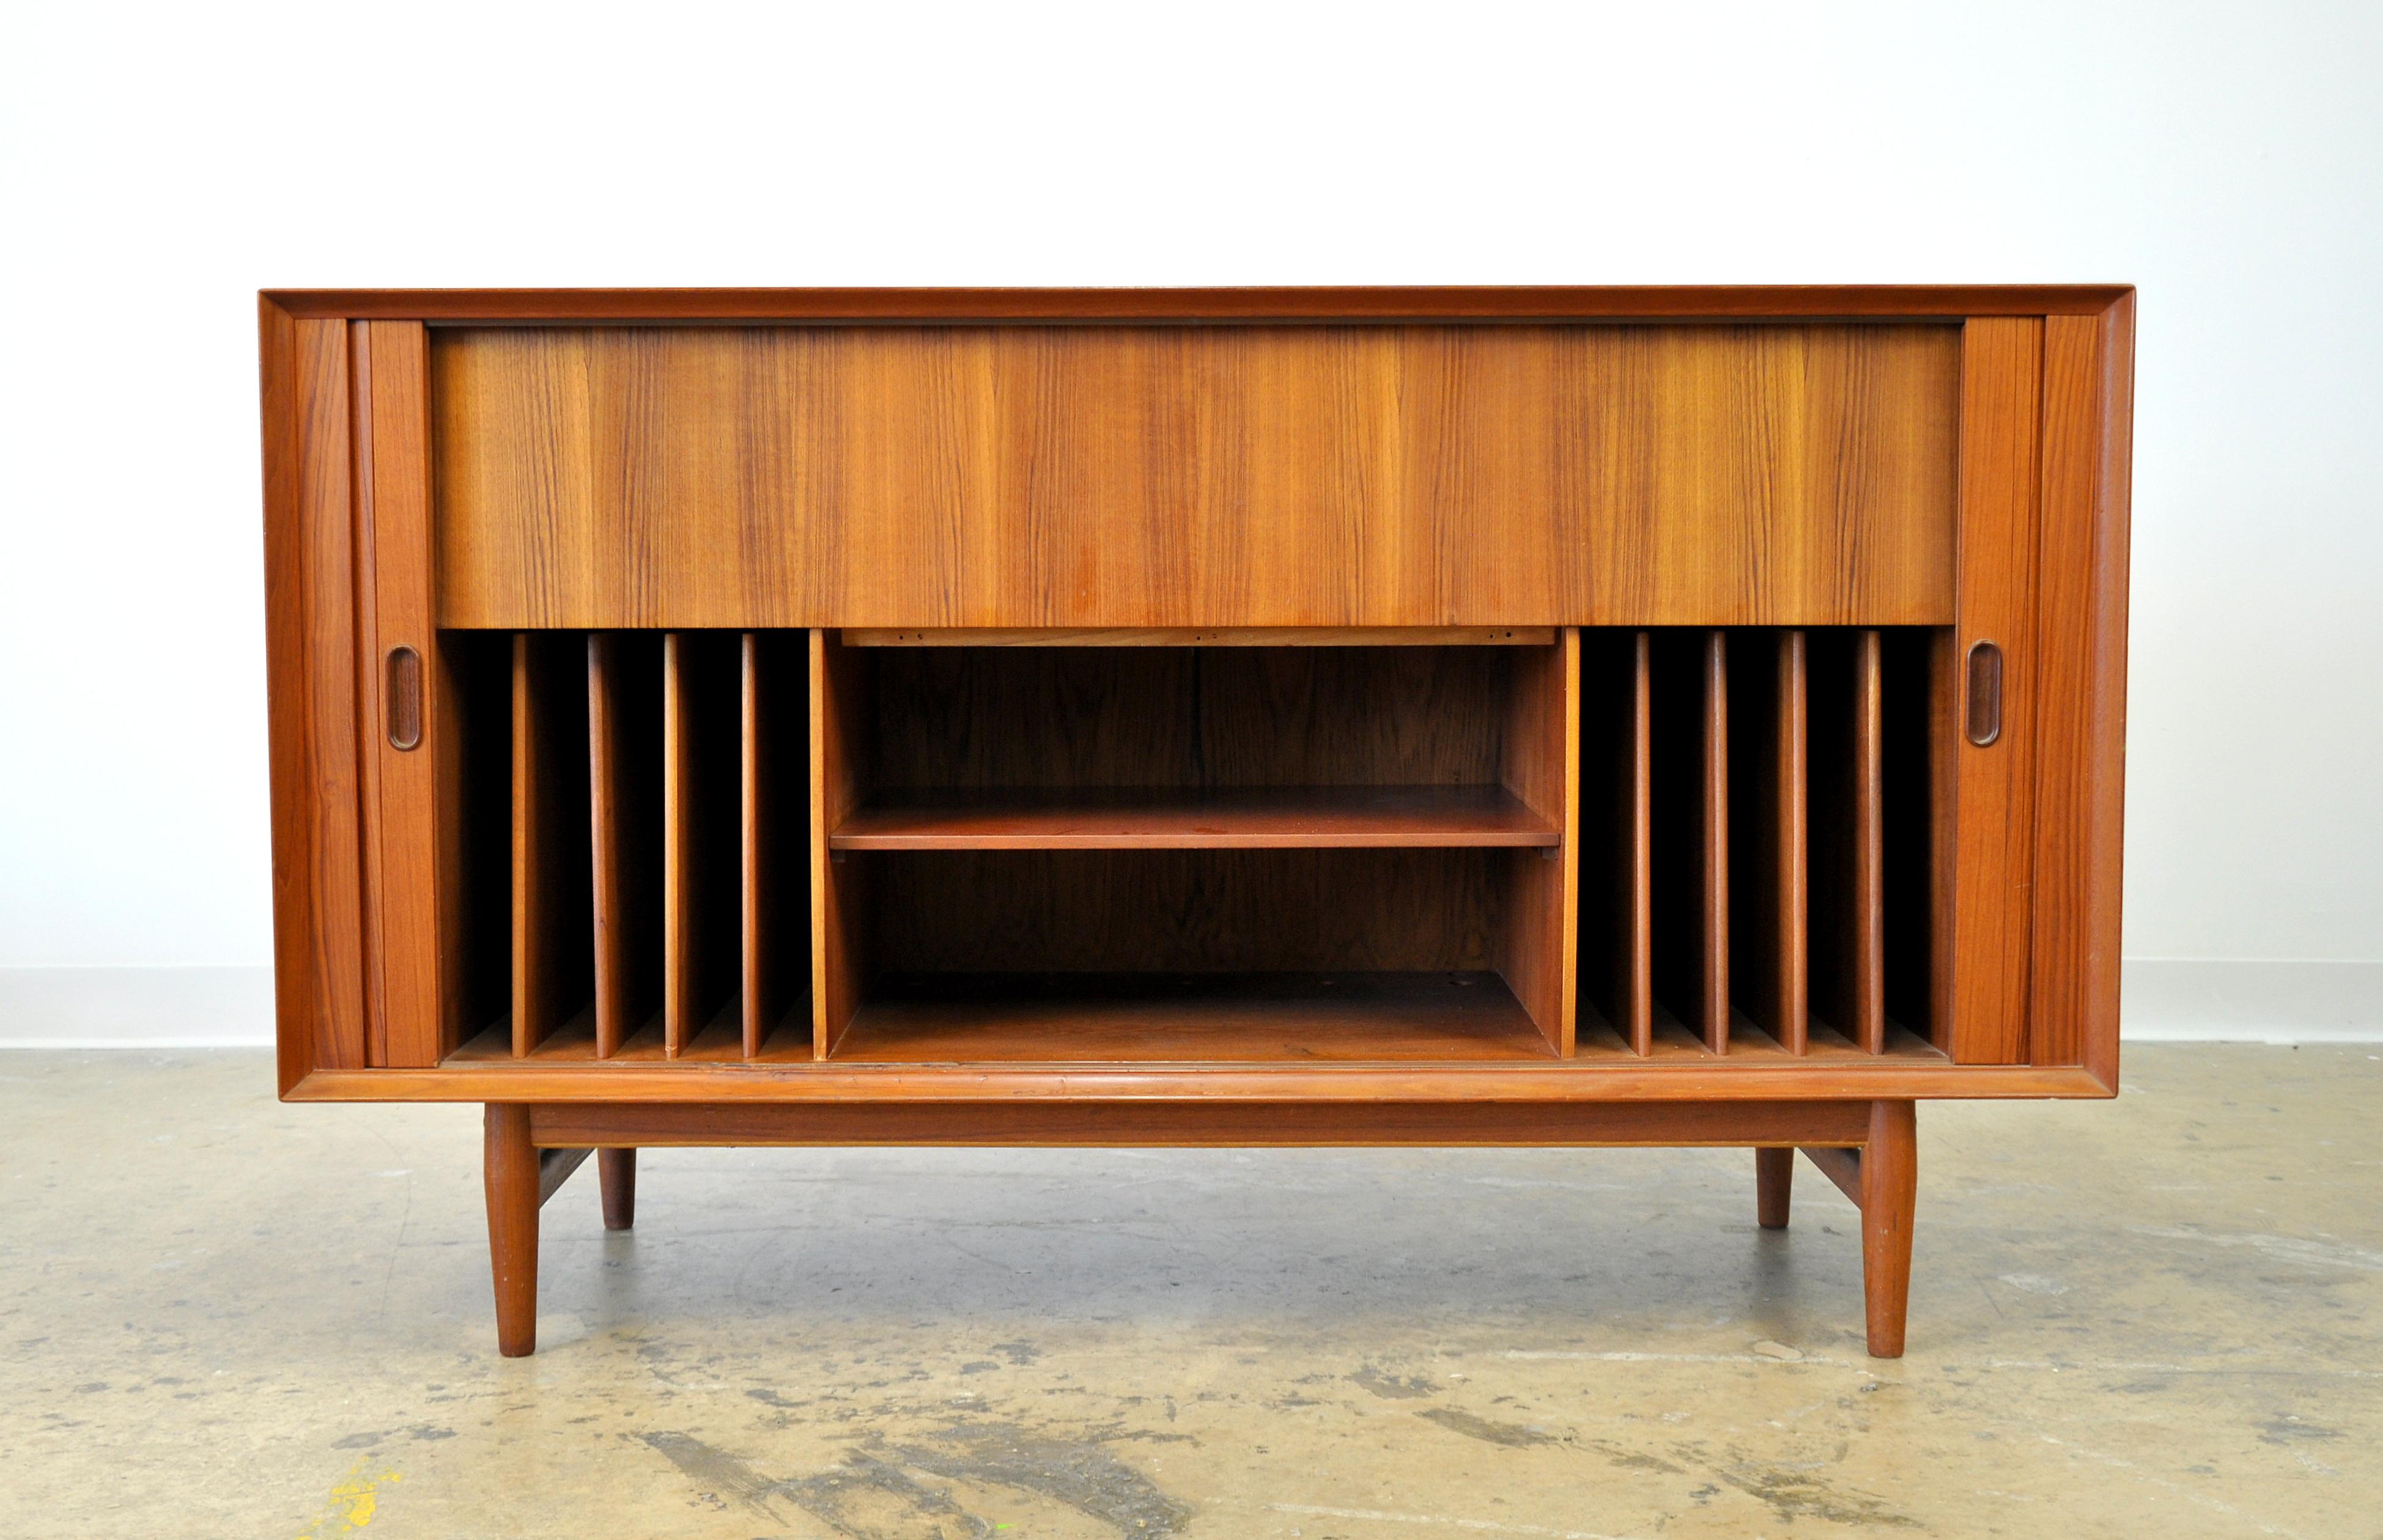 A rare Danish modern teak entertainment console or hifi stereo music cabinet designed by Arne Vodder and manufactured by Sibast in the 1960s. The credenza, which can also be used as a dry bar, features tambour sliding doors opening to an interior